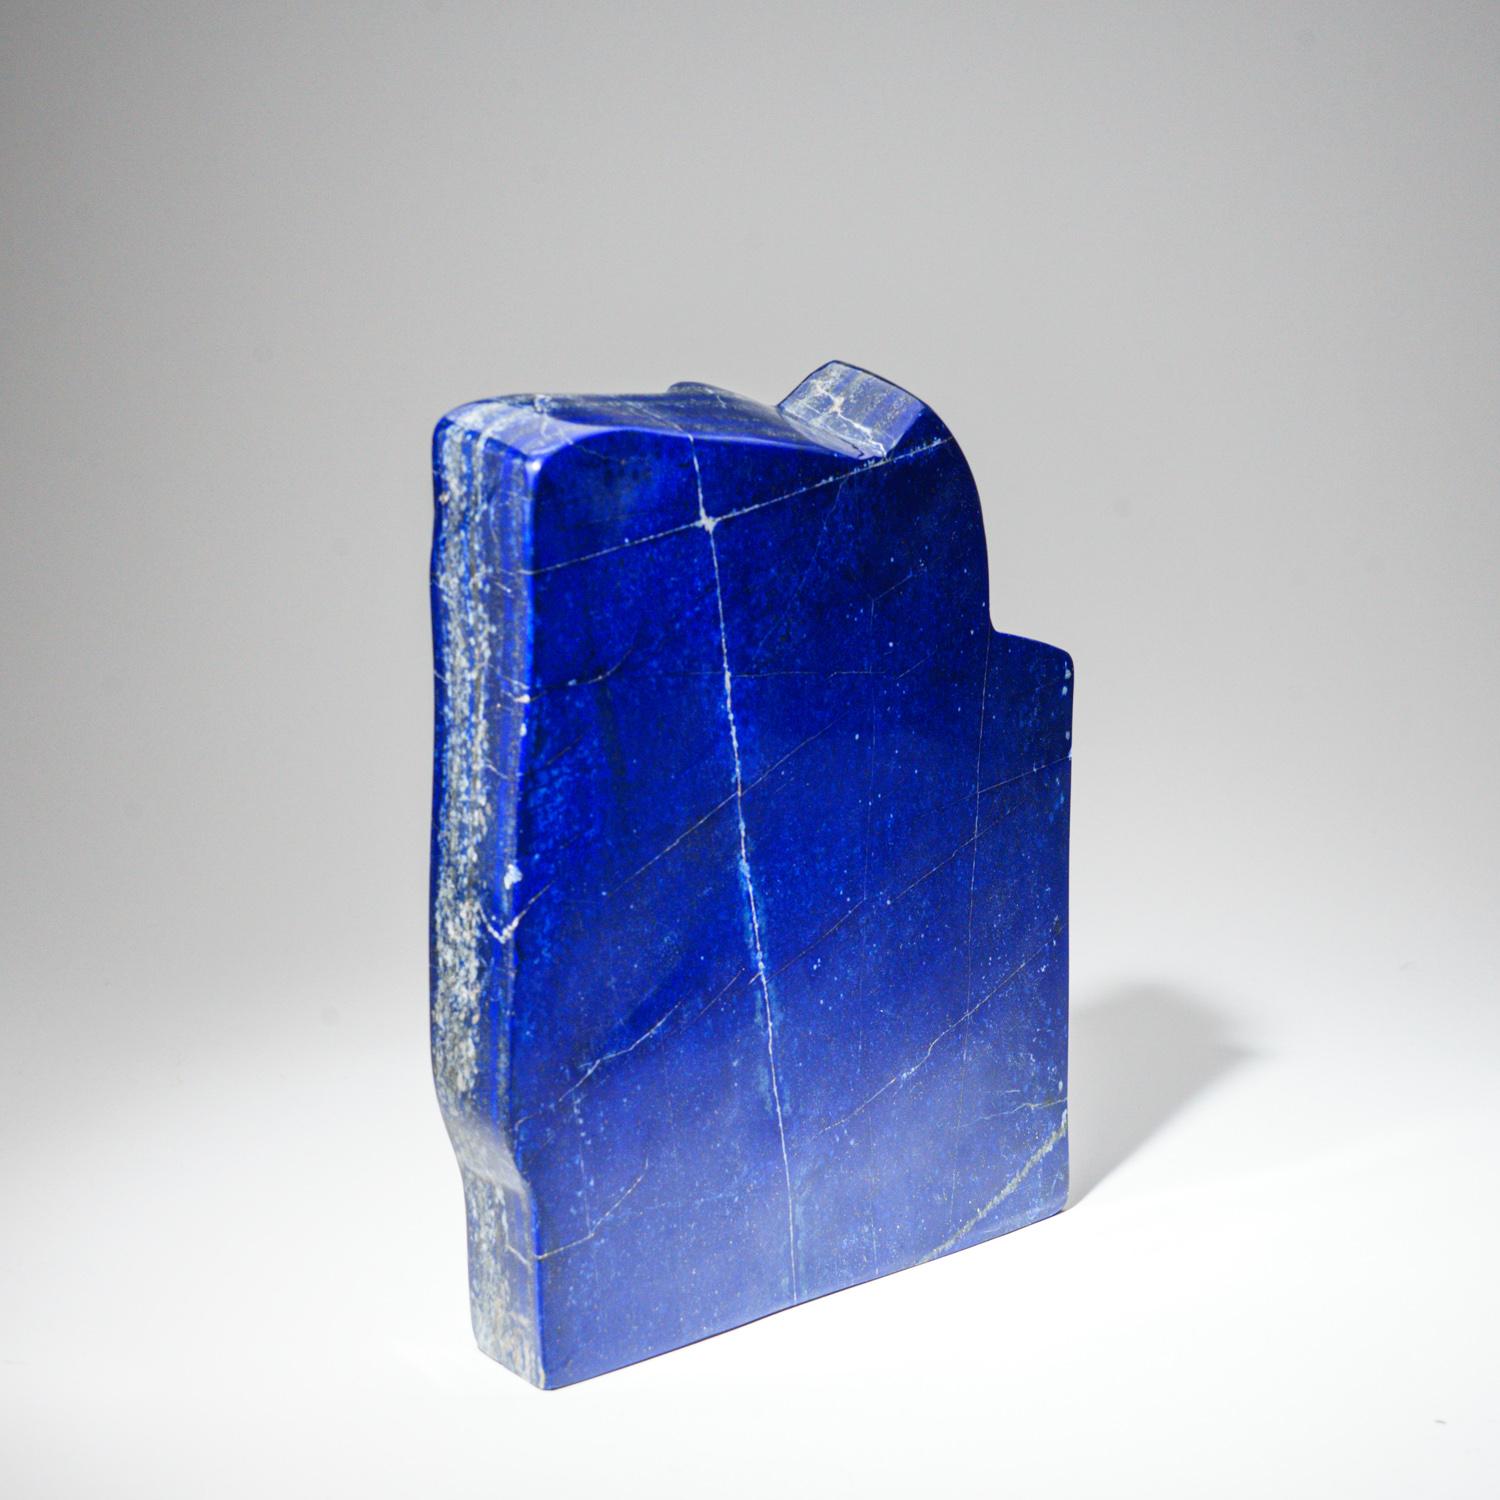 Contemporary Polished Lapis Lazuli Freeform from Afghanistan (10.2 lbs)